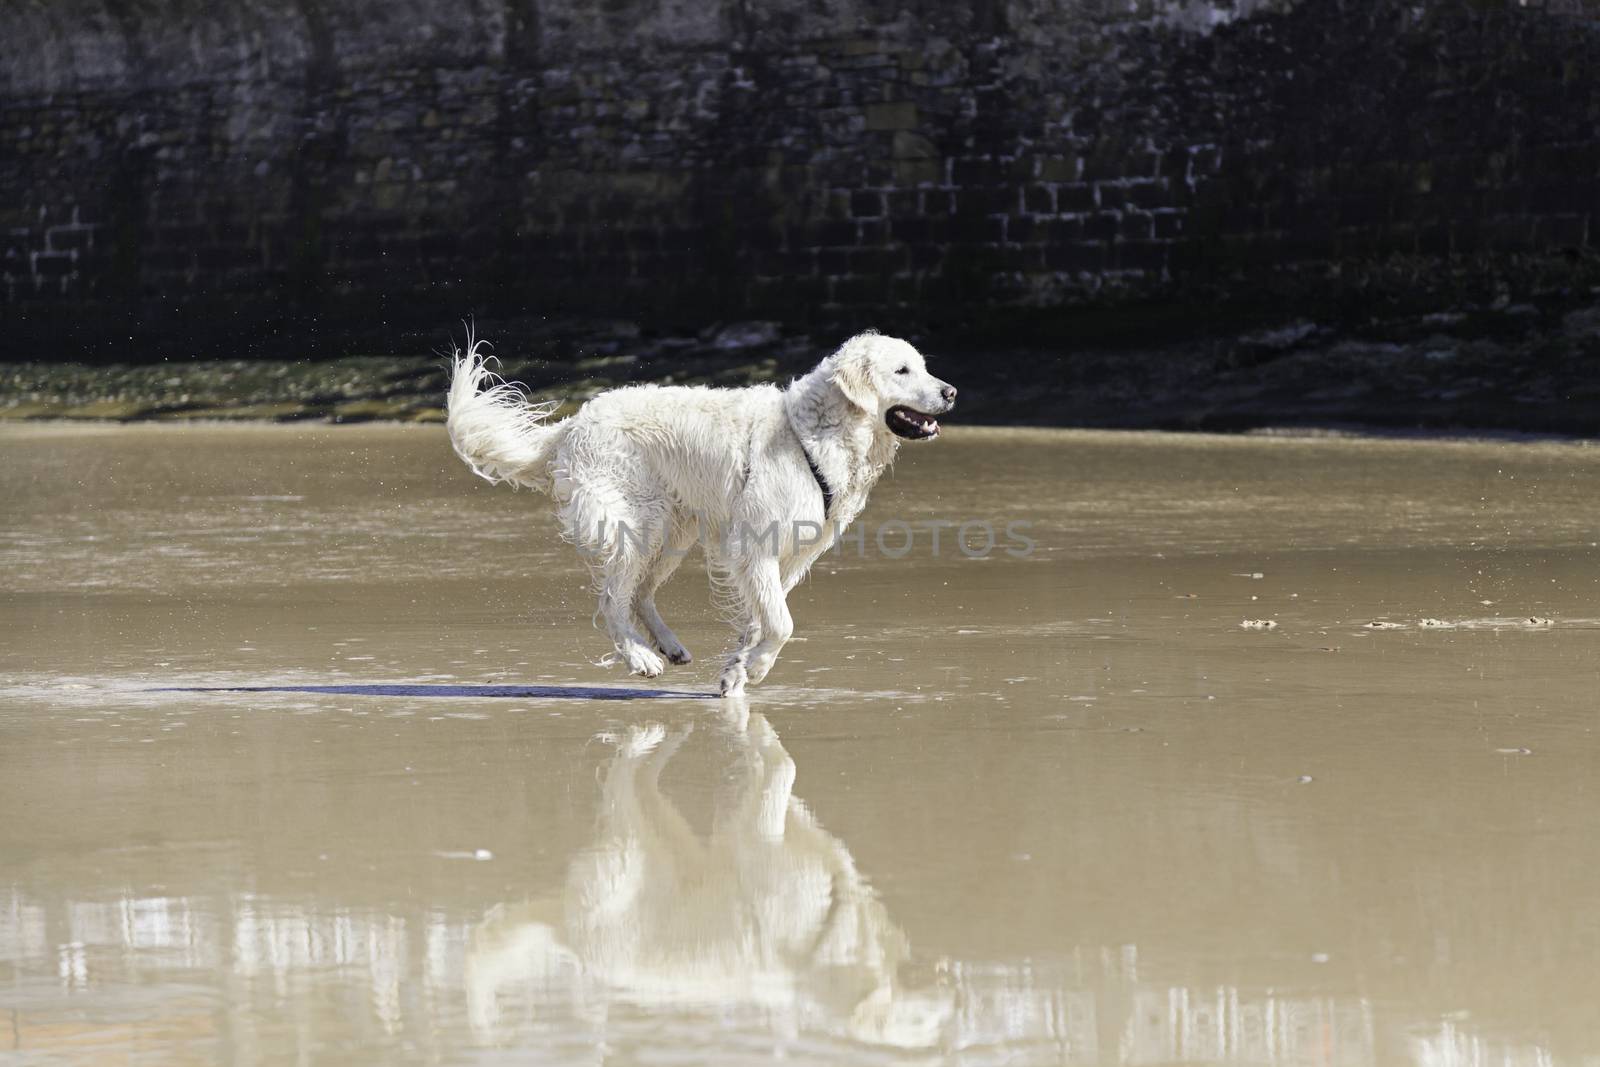 I dog playing on the beach, detail of a pet enjoying the sea, fun and games, animal and nature